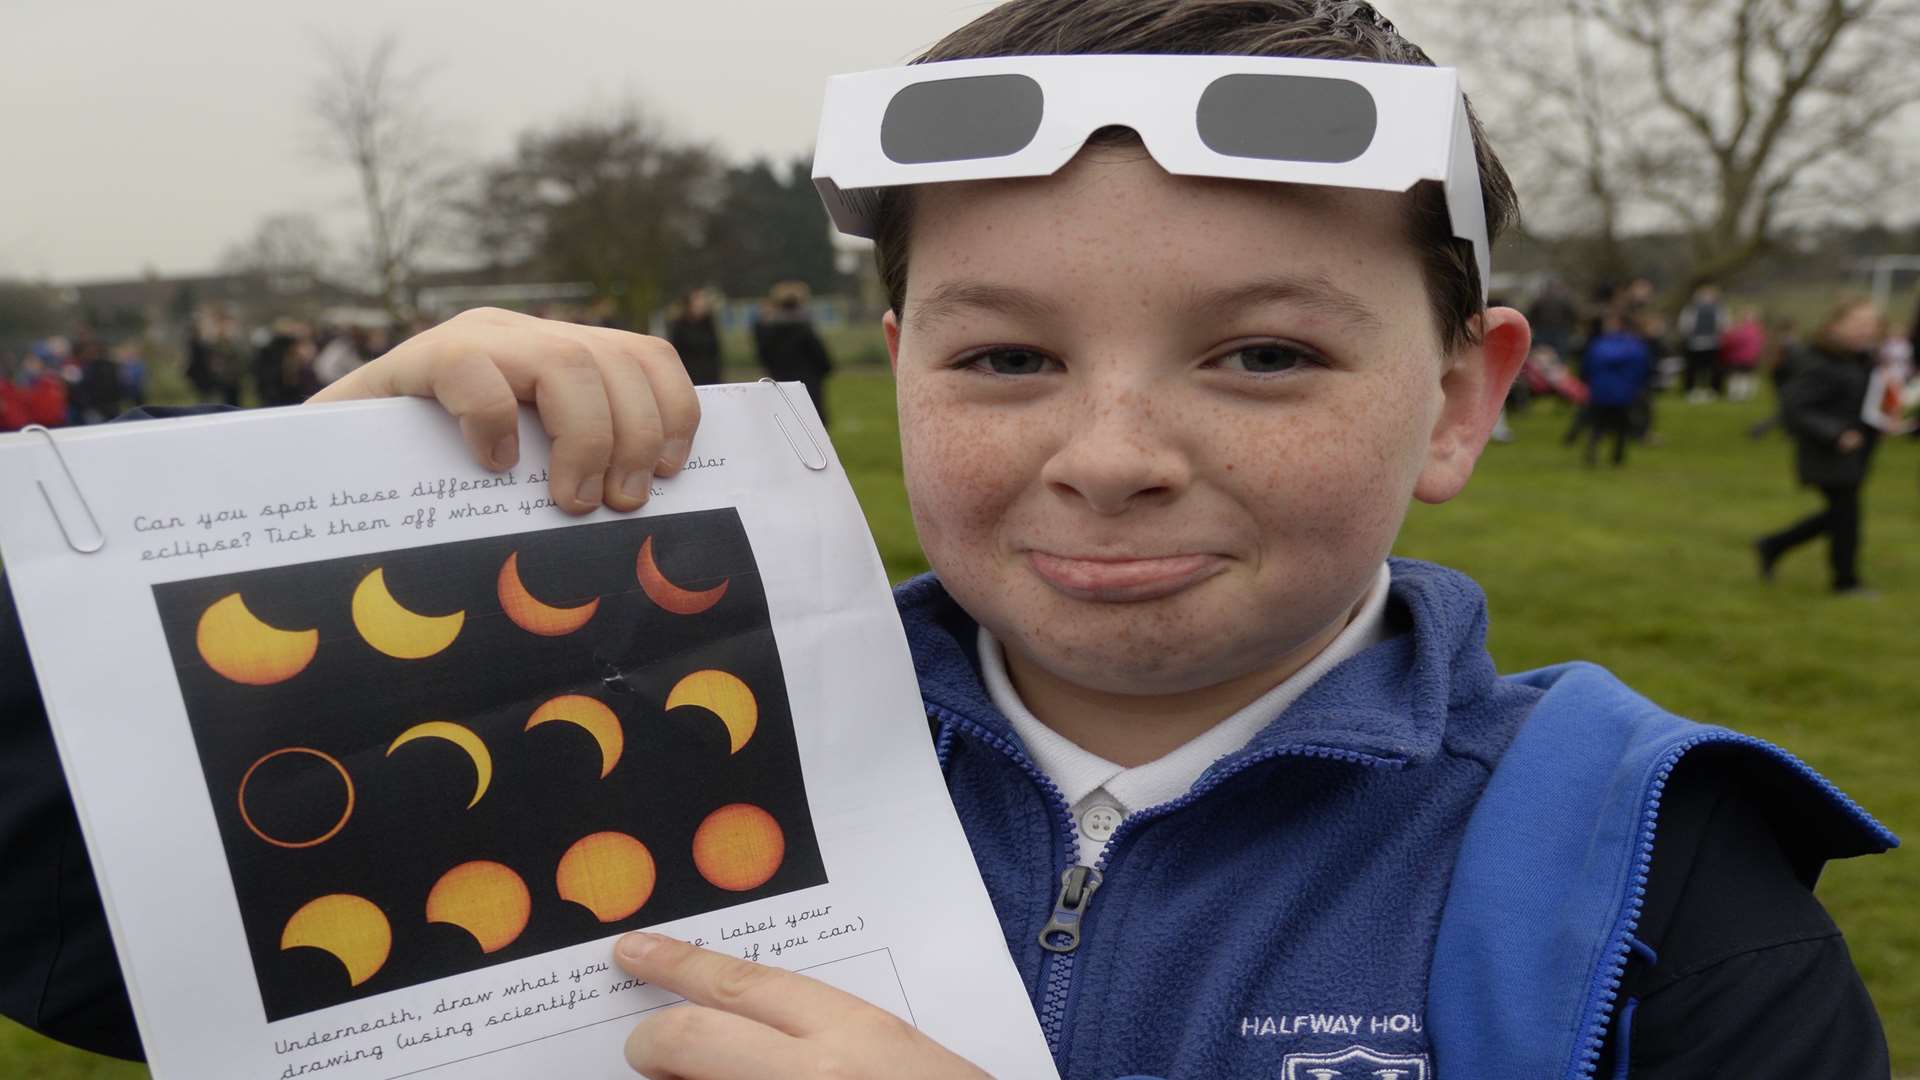 Lennon, 11, points out what people would have seen had clouds parted.